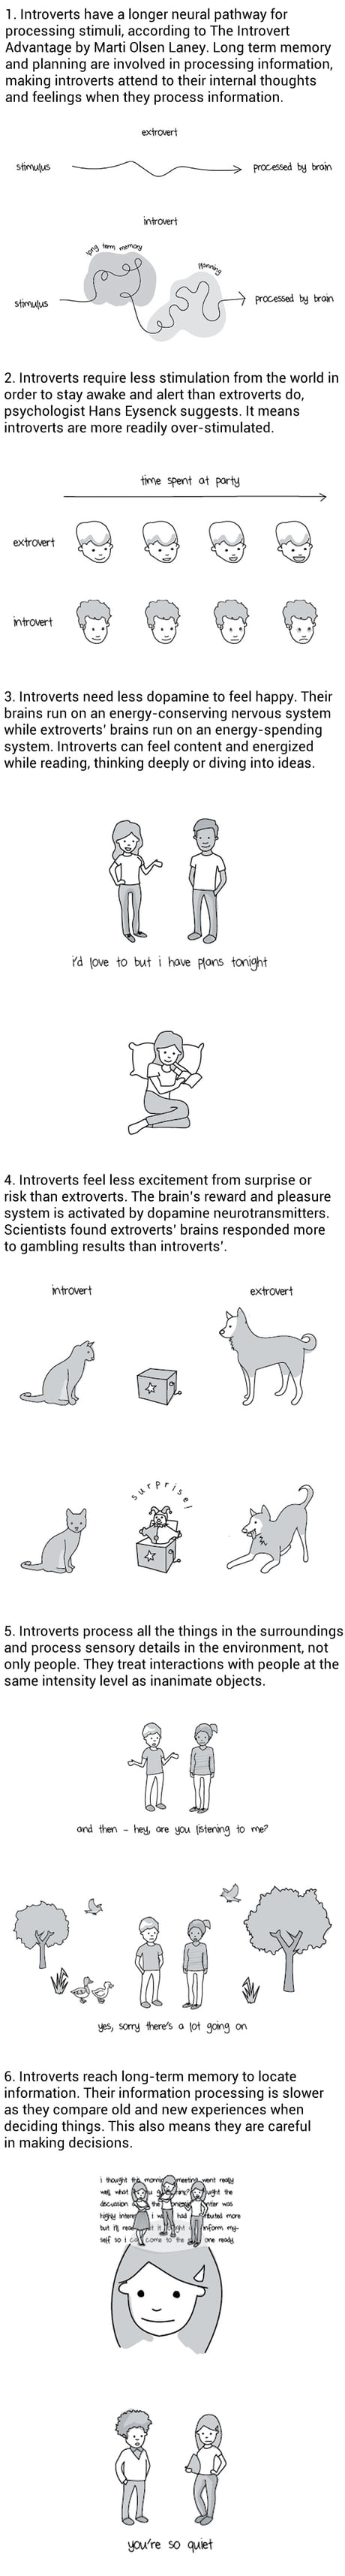 What It's Like In An Introvert's Head (By Liz Fosslien and Mollie